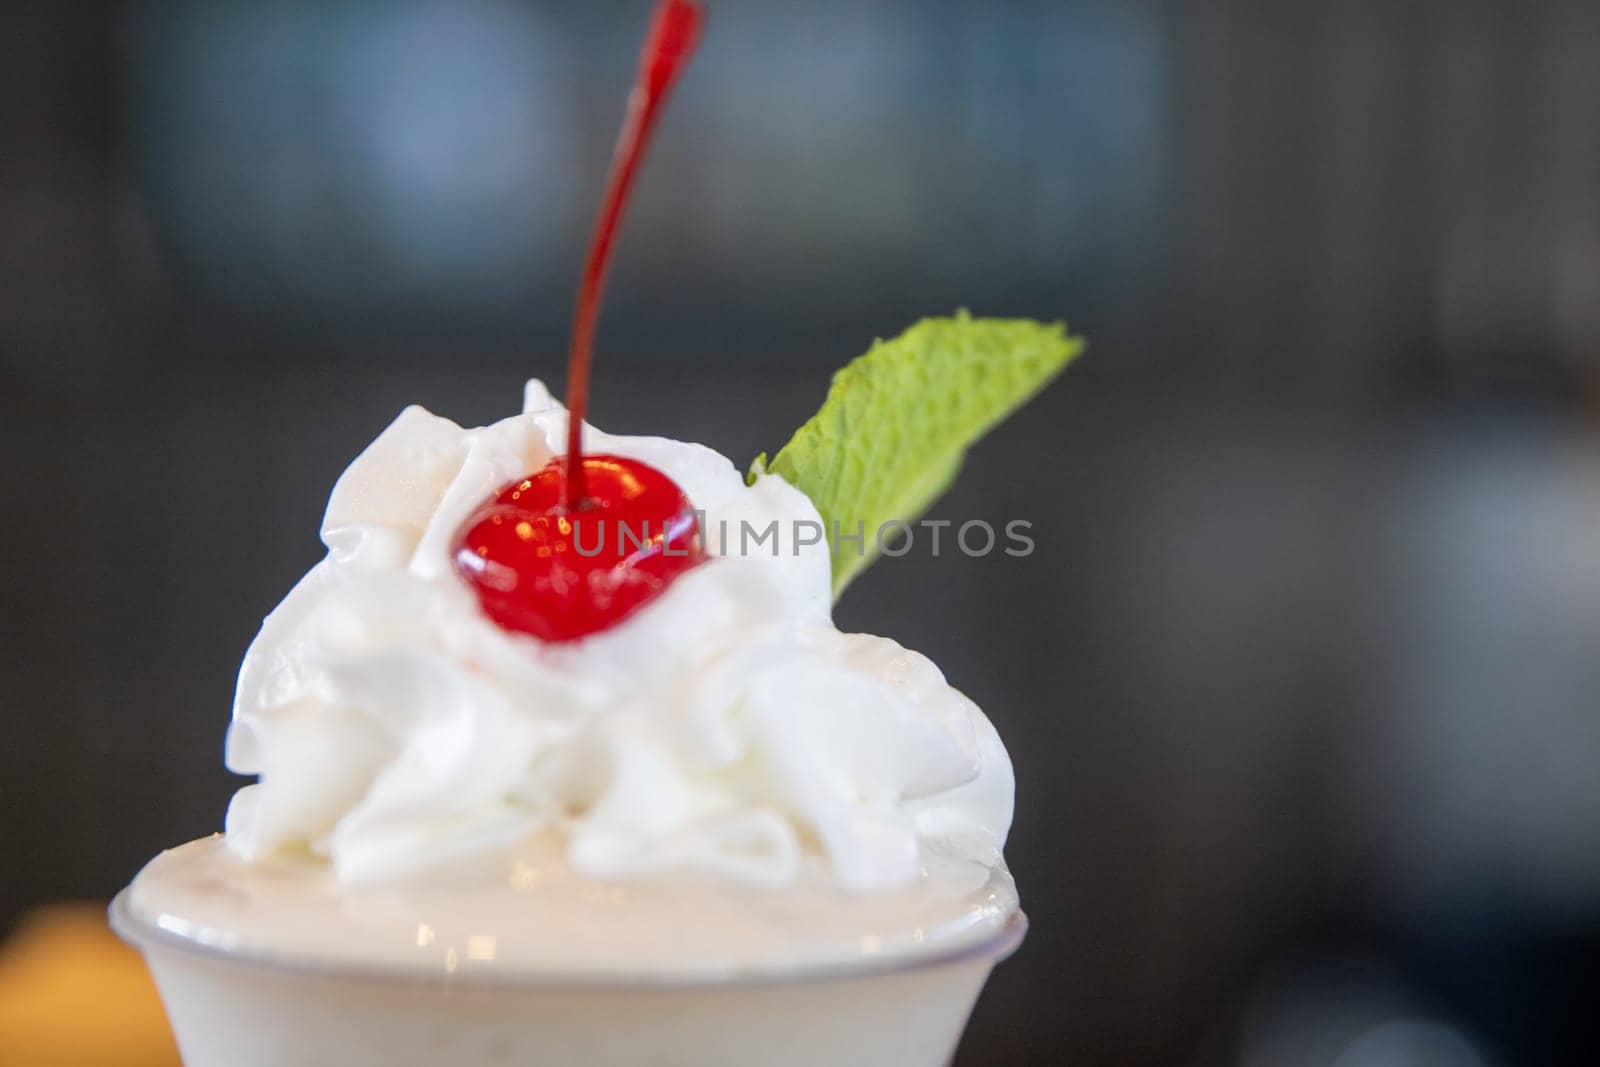 Whipped cream topping with a cherry